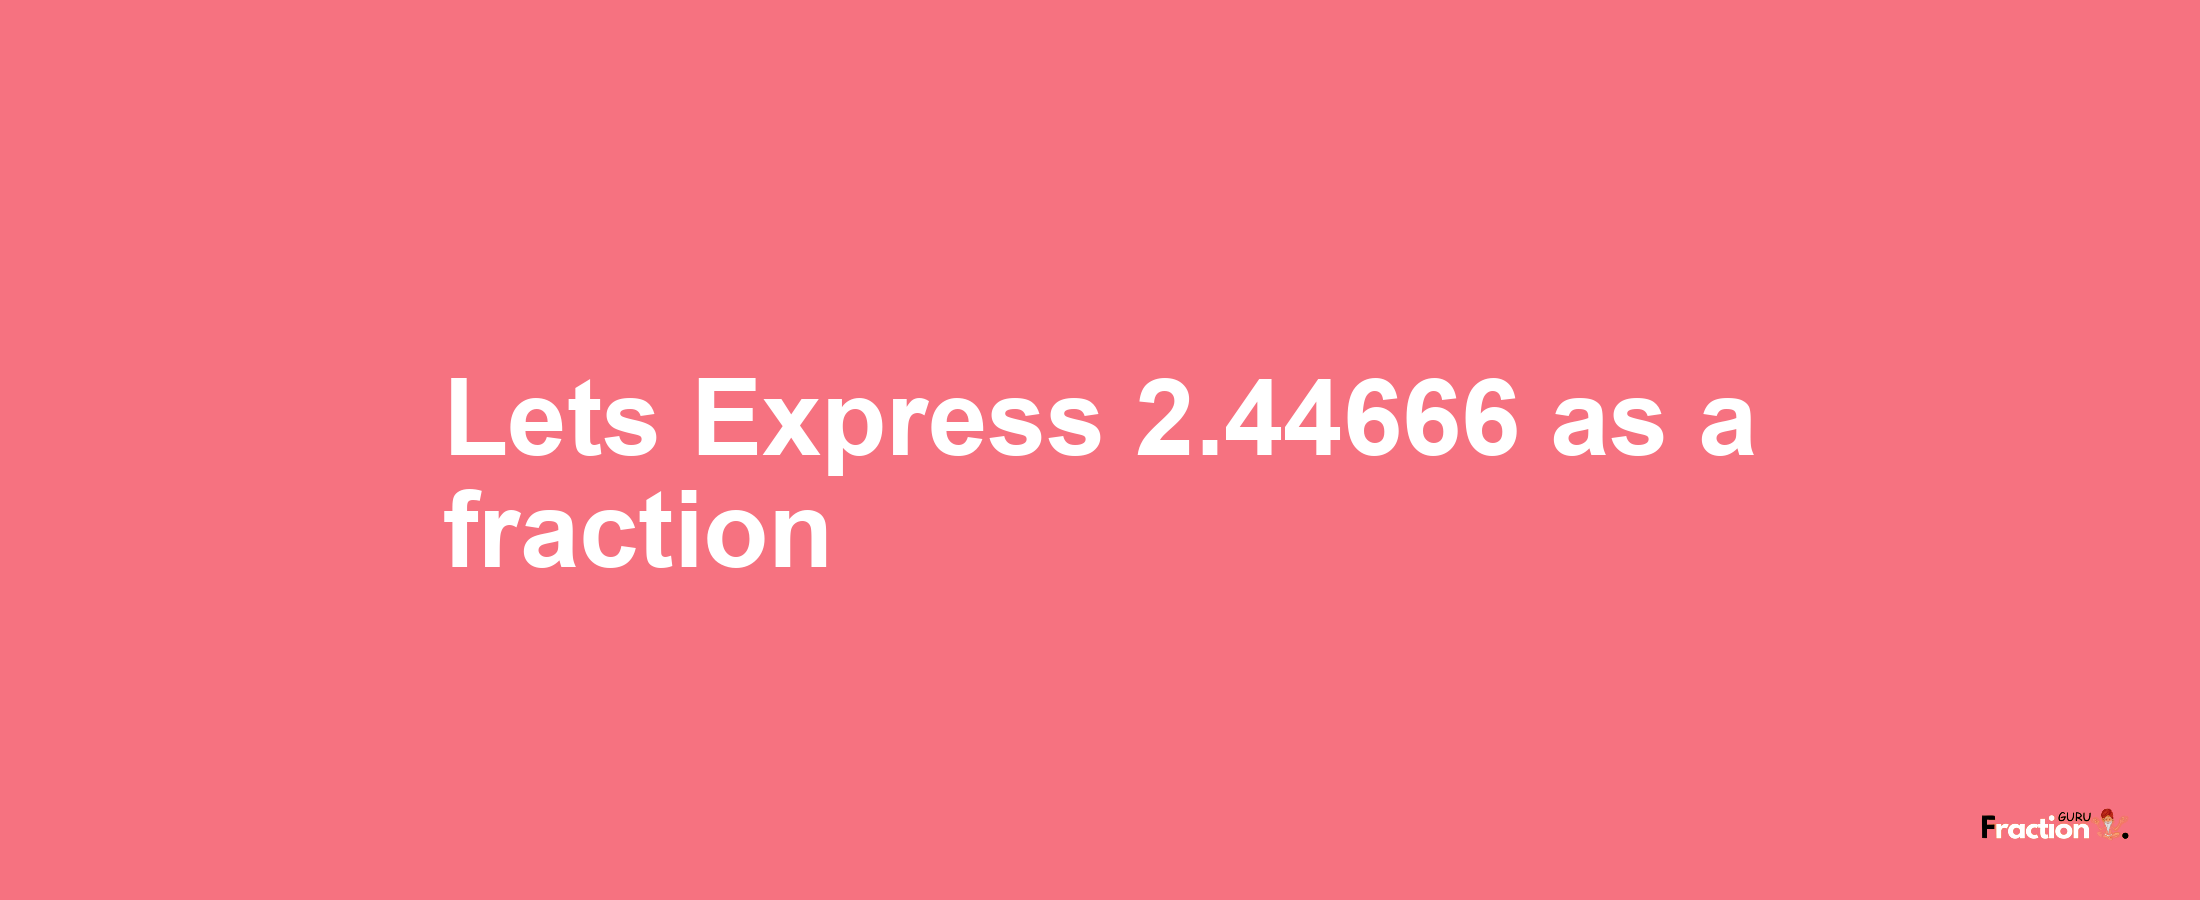 Lets Express 2.44666 as afraction